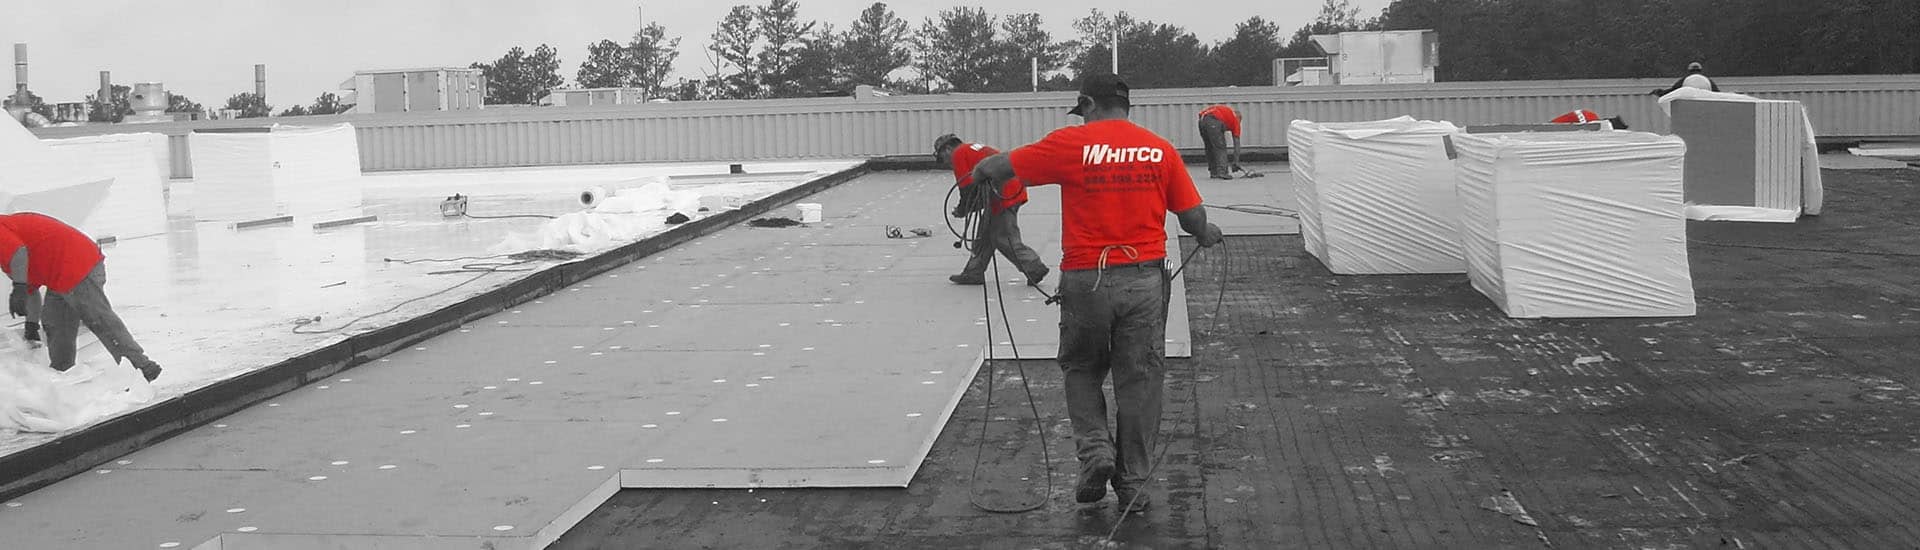 Whitco Roofing Inc